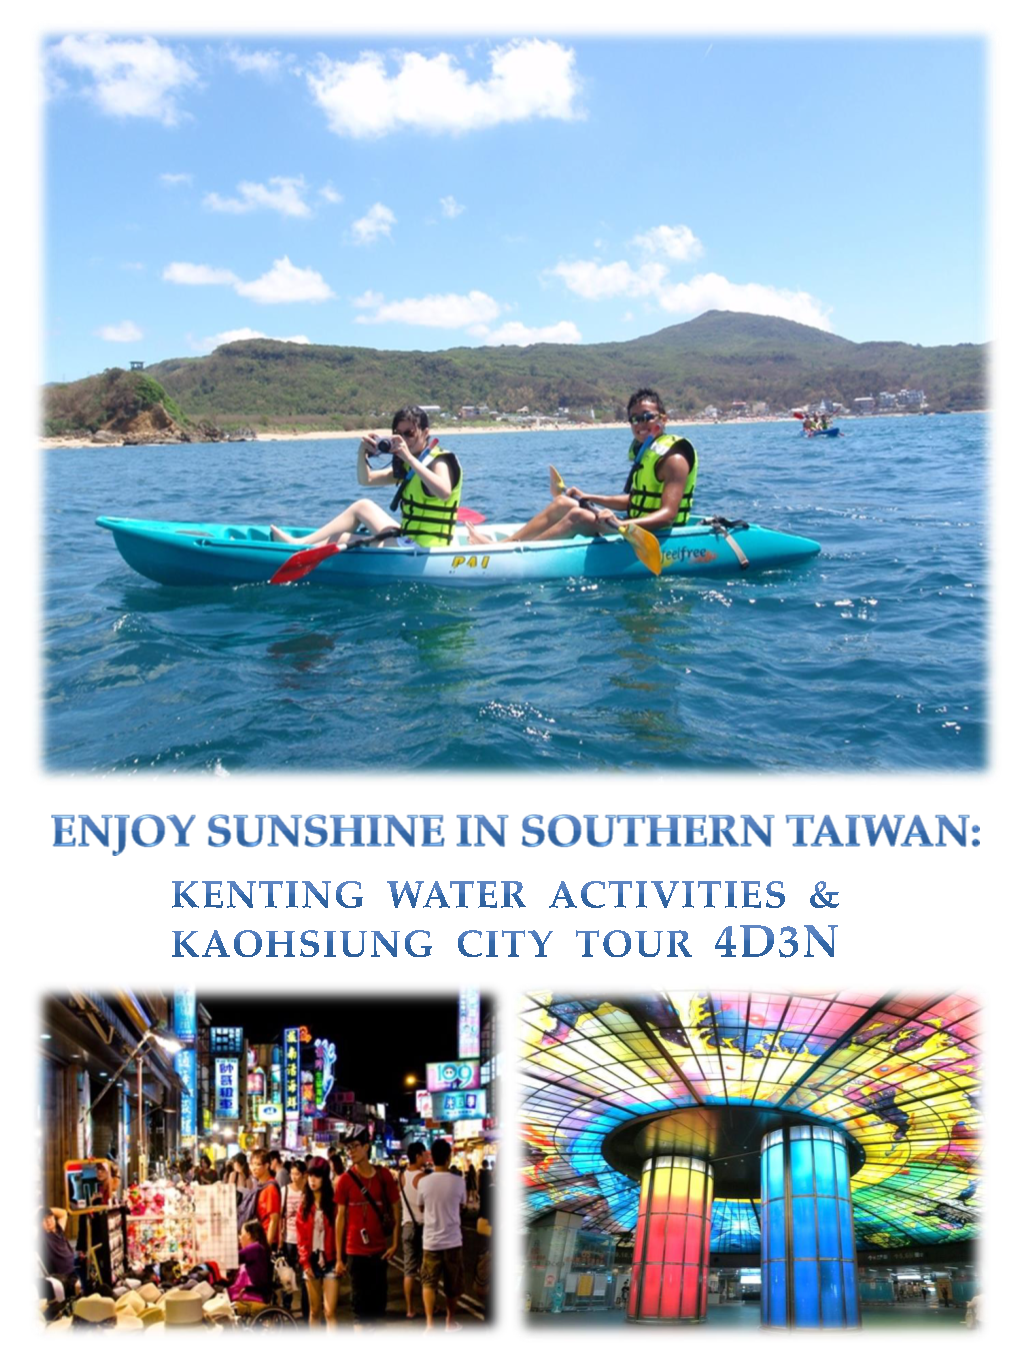 4D3N Kaohsiung and Kenting Tour 4D3N4 Days 3 Nights